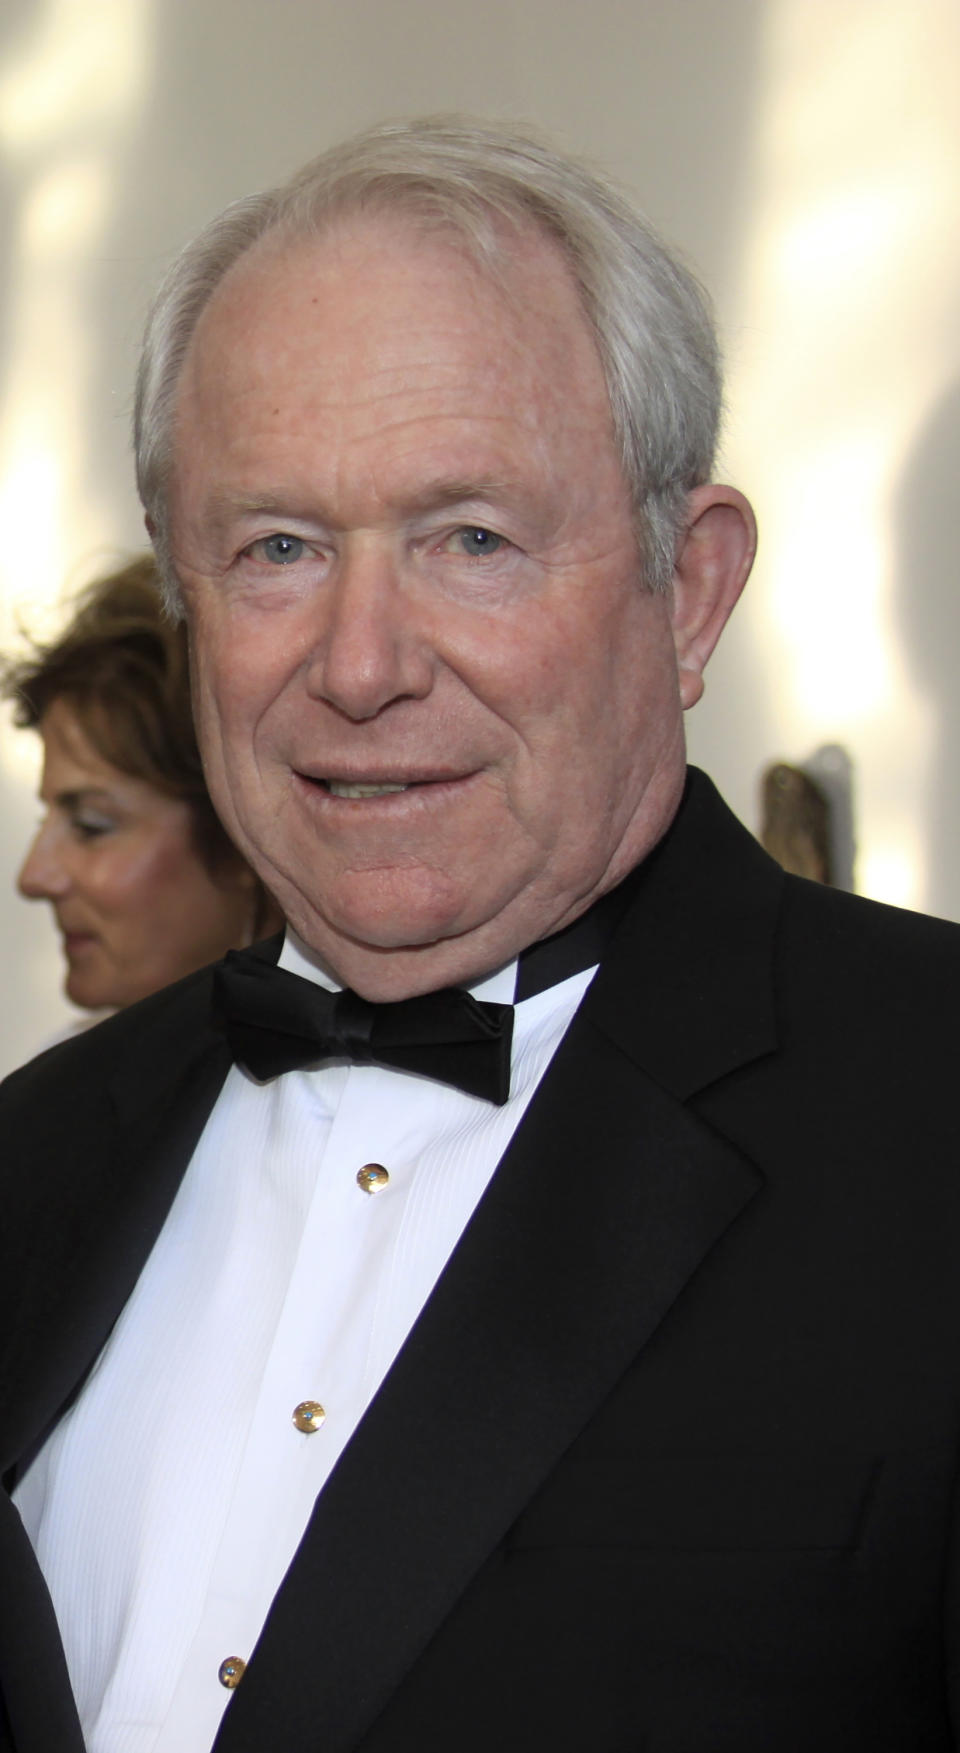 This April 17, 2010 photo shows William Sanders attending the Bedazzled Gala in El Paso, Texas. Sanders, the Democratic presidential candidate Beto O'Rourke's father-in-law, is a wealthy real estate investor and has helped make the former Texas congressman and his wife millionaires. Sanders also contributed to O'Rourke's bids for El Paso City Council, Congress, Senate and now the presidency. O'Rourke's campaign says Sanders plays no role. Still, O'Rourke, known as a champion of little-guy values, might never have made it on the national stage without the help of his father-in-law. (Stacy Kendrick, El Paso Inc. via AP)